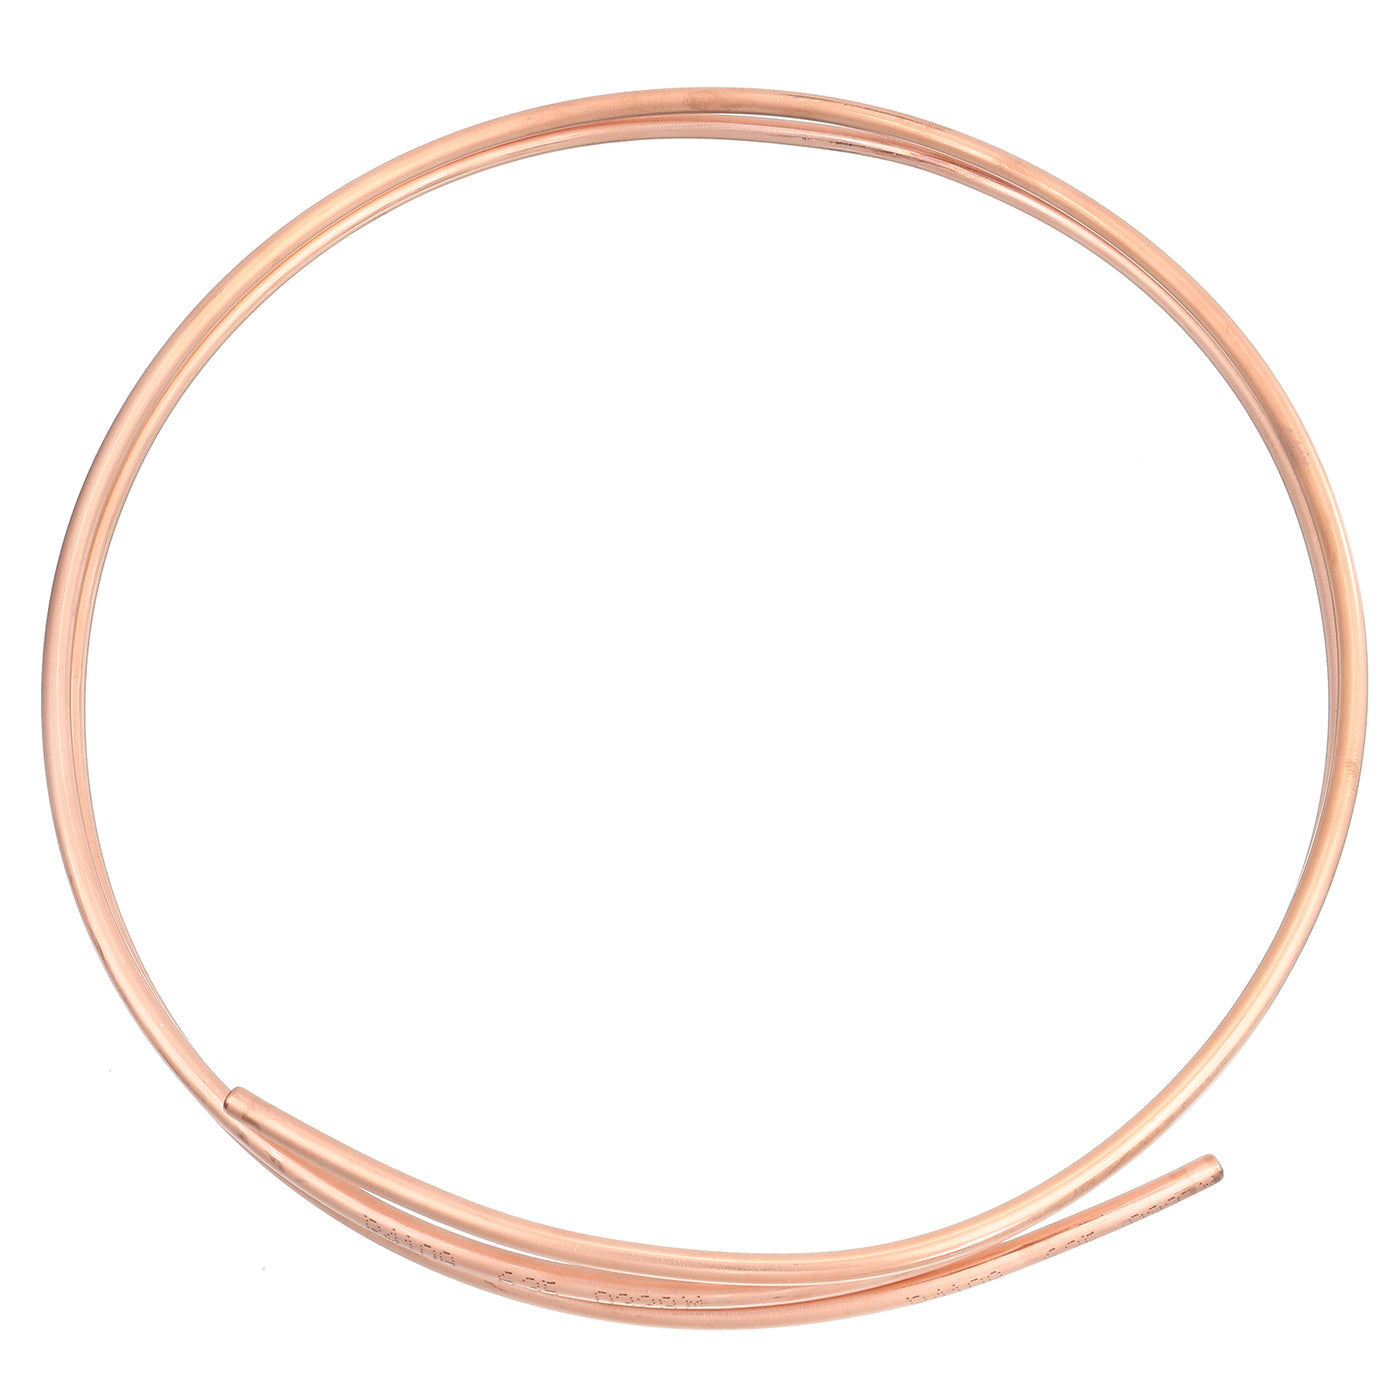 Harfington Copper Tube Refrigeration Tubing 0.31" OD x 0.27" ID x 6.6Ft Seamless Round Pipe Coil for Refrigerator, Freezer, Air Conditioner